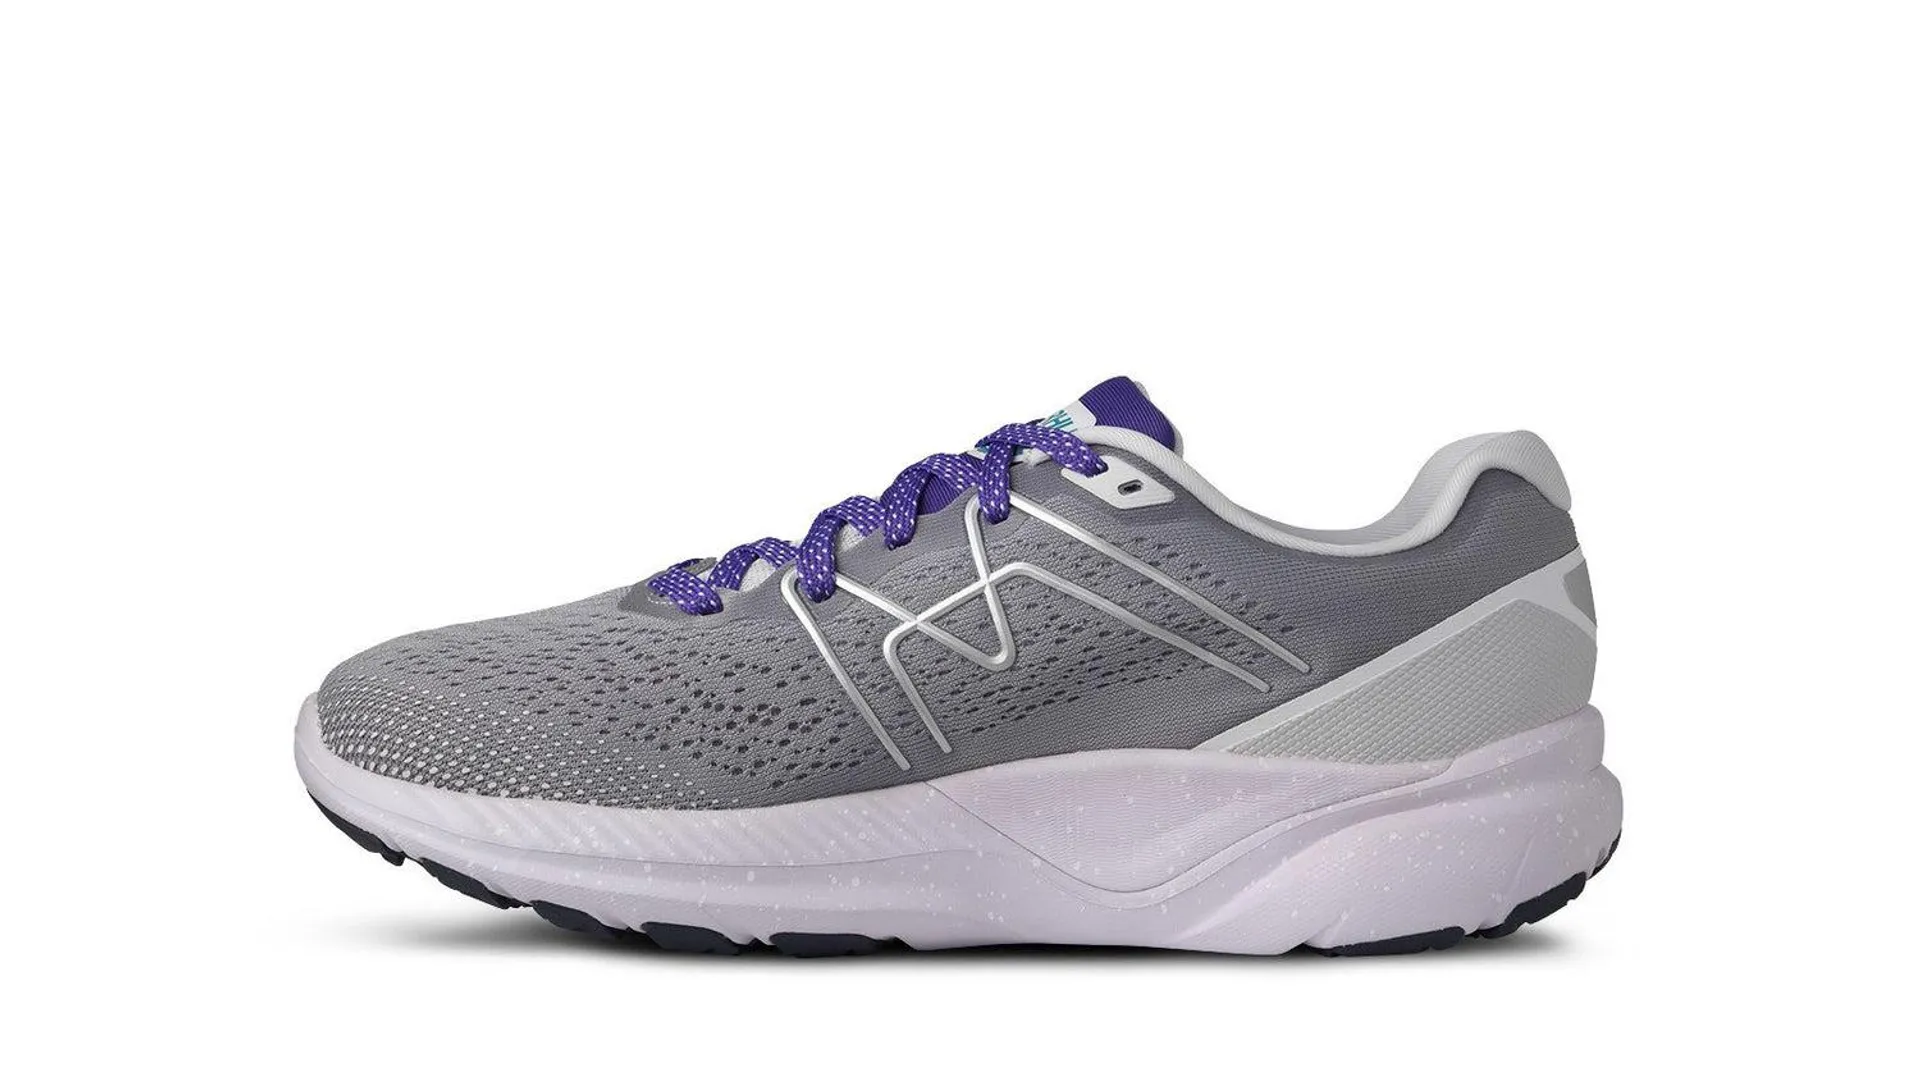 WOMEN'S FUSION 3.5 ULTIMATE GRAY / ORCHID HUSH